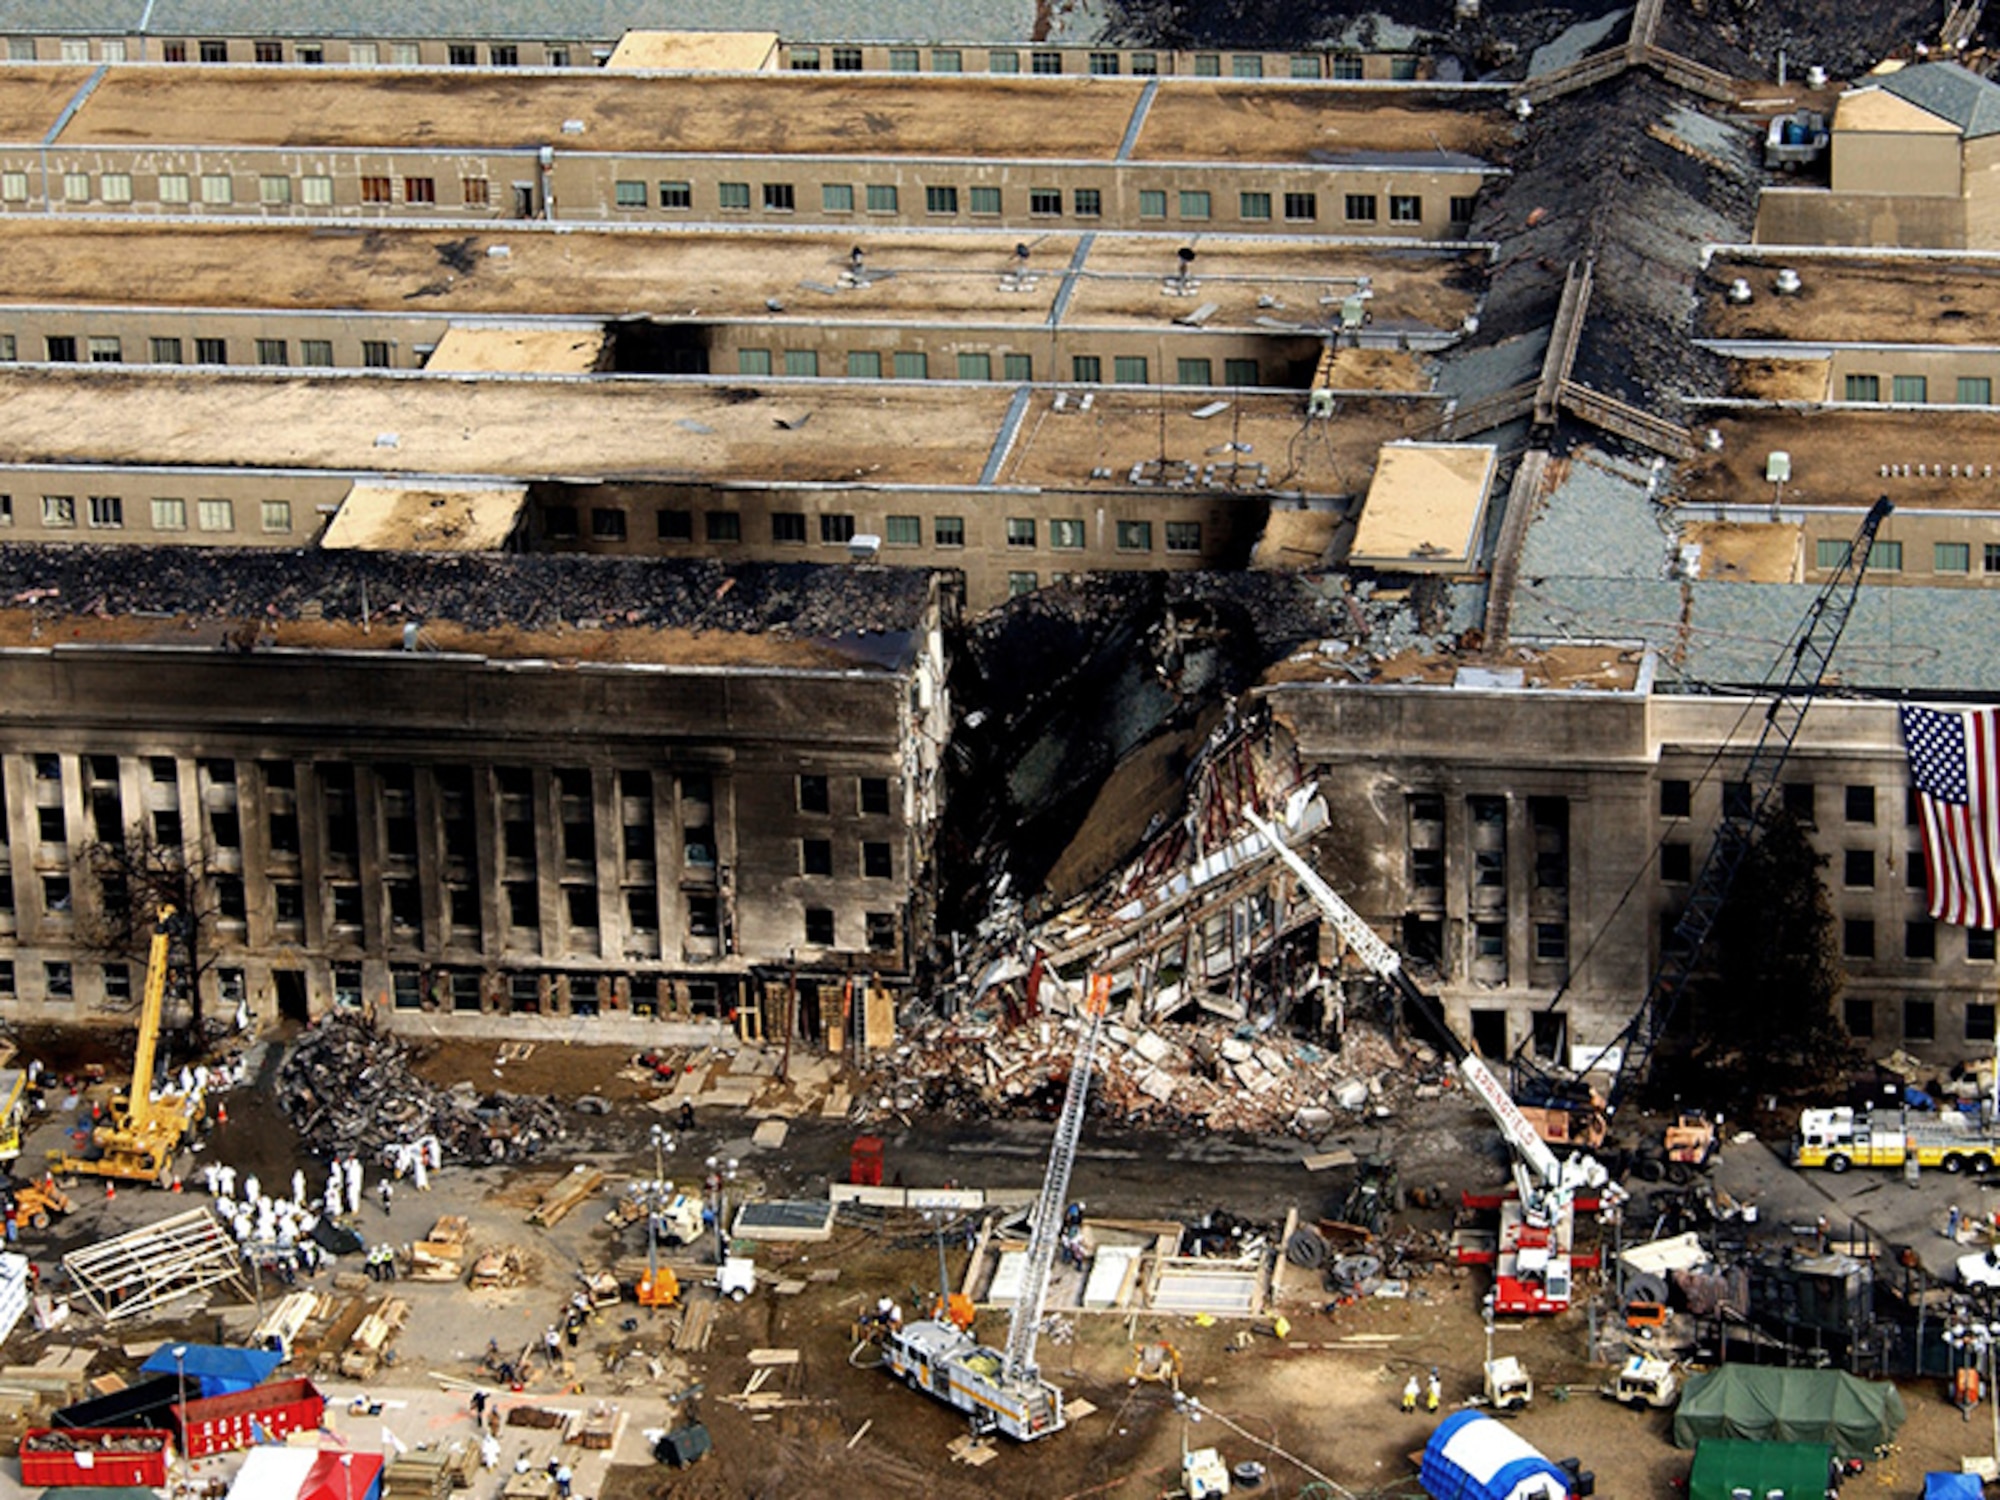 During the attacks on 9/11, the Pentagon was damaged by fire and partly collapsed. (U.S. Air Force photo/Tech. Sgt. Cedric H. Rudisill)